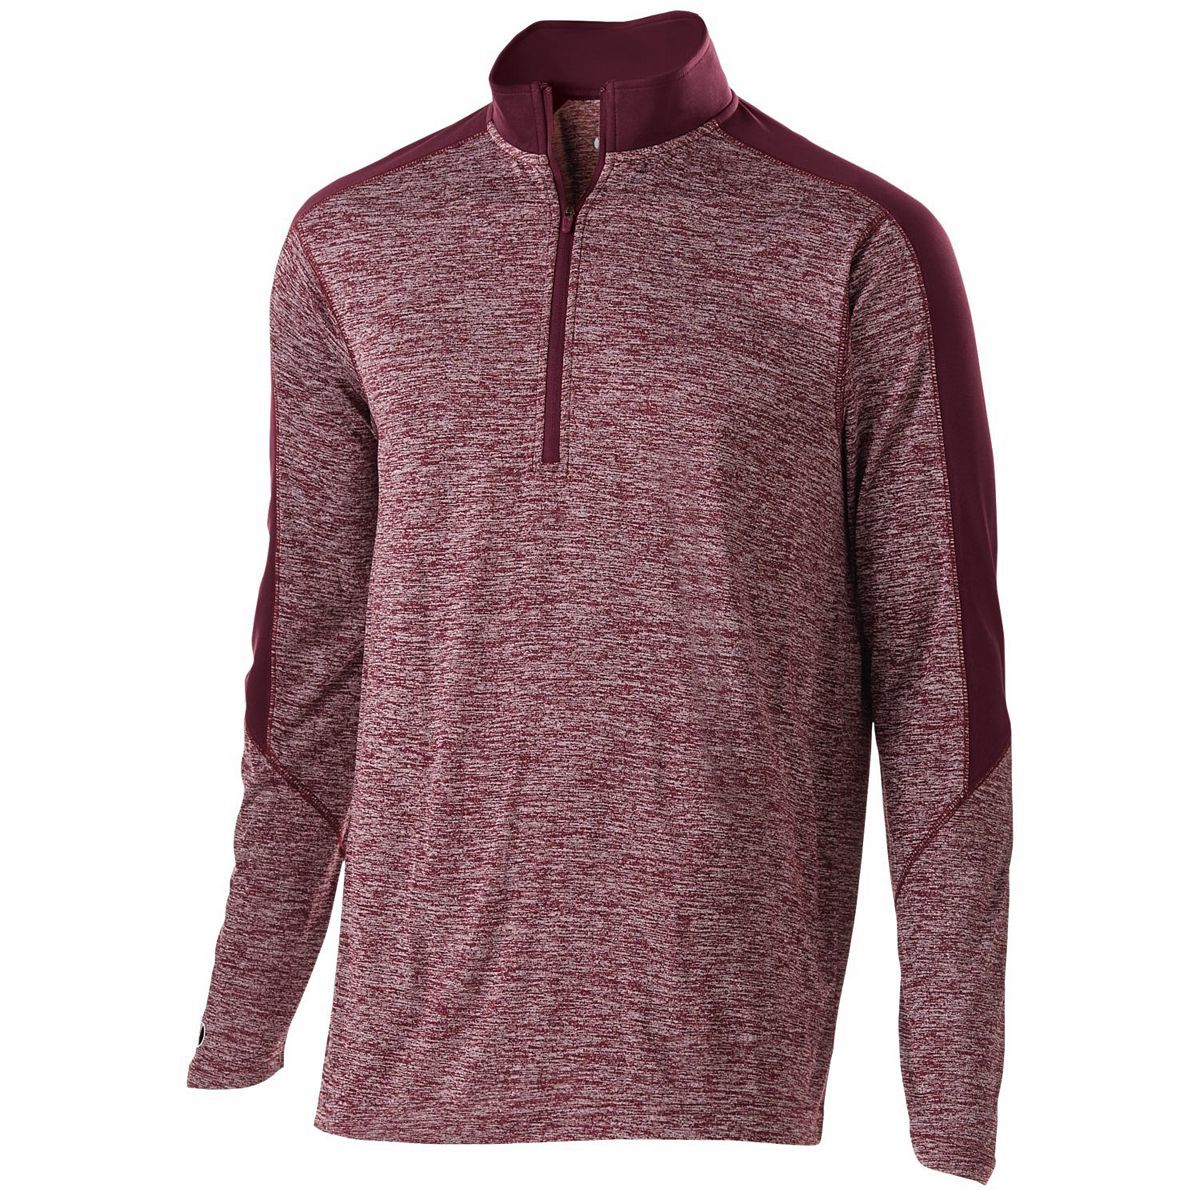 Holloway Youth Electrify 1/2 Zip Pullover in Maroon Heather/Maroon  -Part of the Youth, Youth-Pullover, Holloway, Outerwear product lines at KanaleyCreations.com